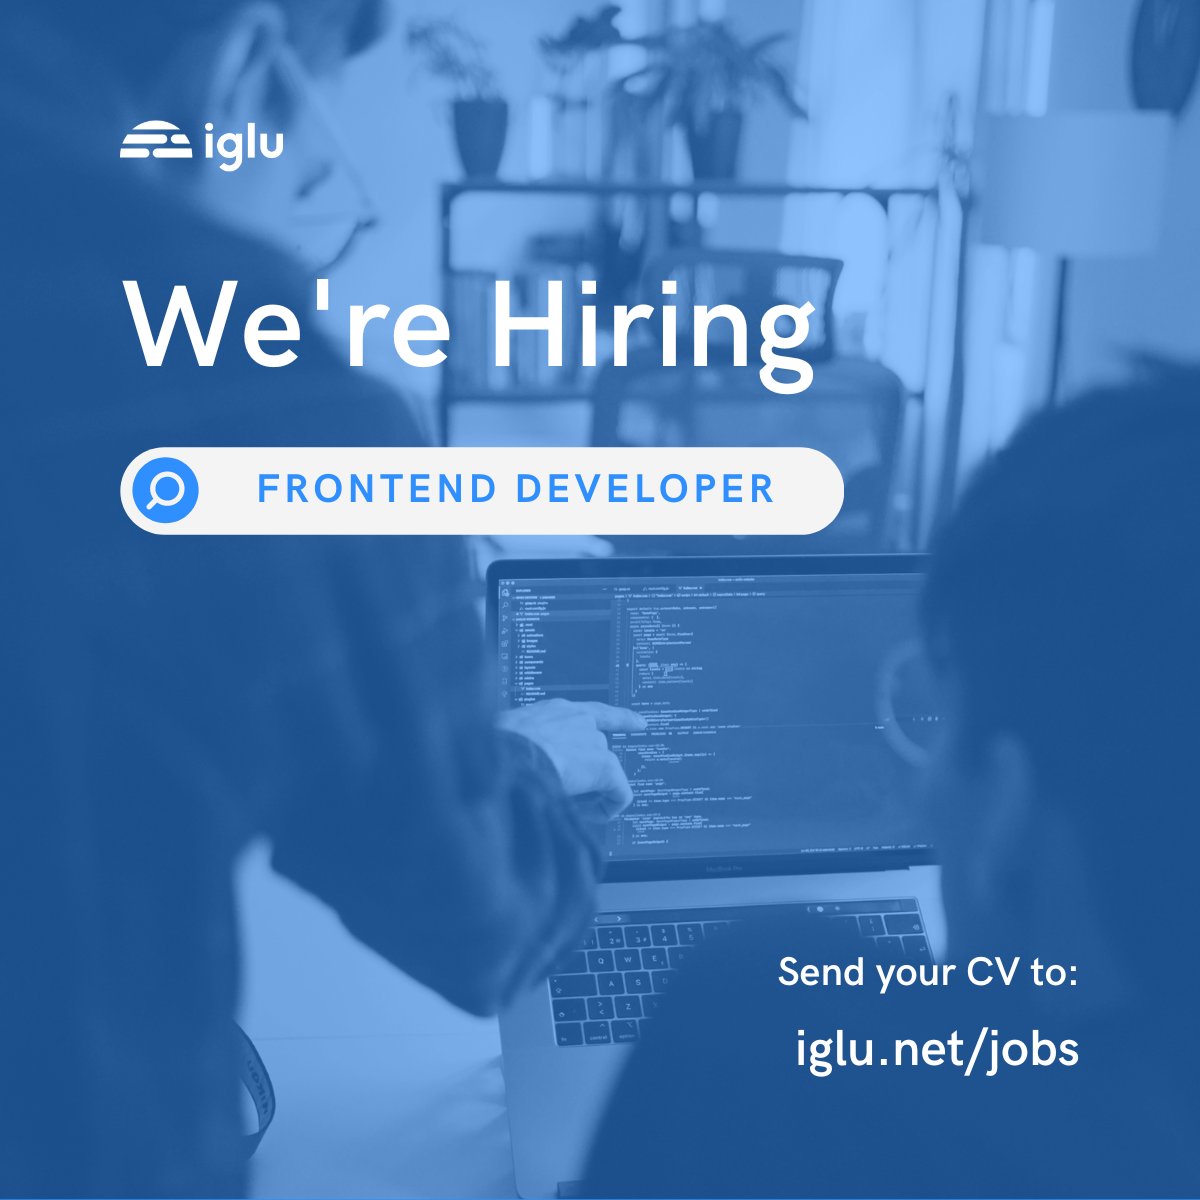 JOB AVAILABLE: Frontend Developer 🧑‍💻 🚀 
We are currently in need of a frontend developer to join our team for a one-month project. Apply now here: buff.ly/3QkVPyZ 

#NowHiring #JobOpening #JoinOurTeam #RemoteWork #FrontendDeveloper #FrontendDeveloperJobs #JobListing